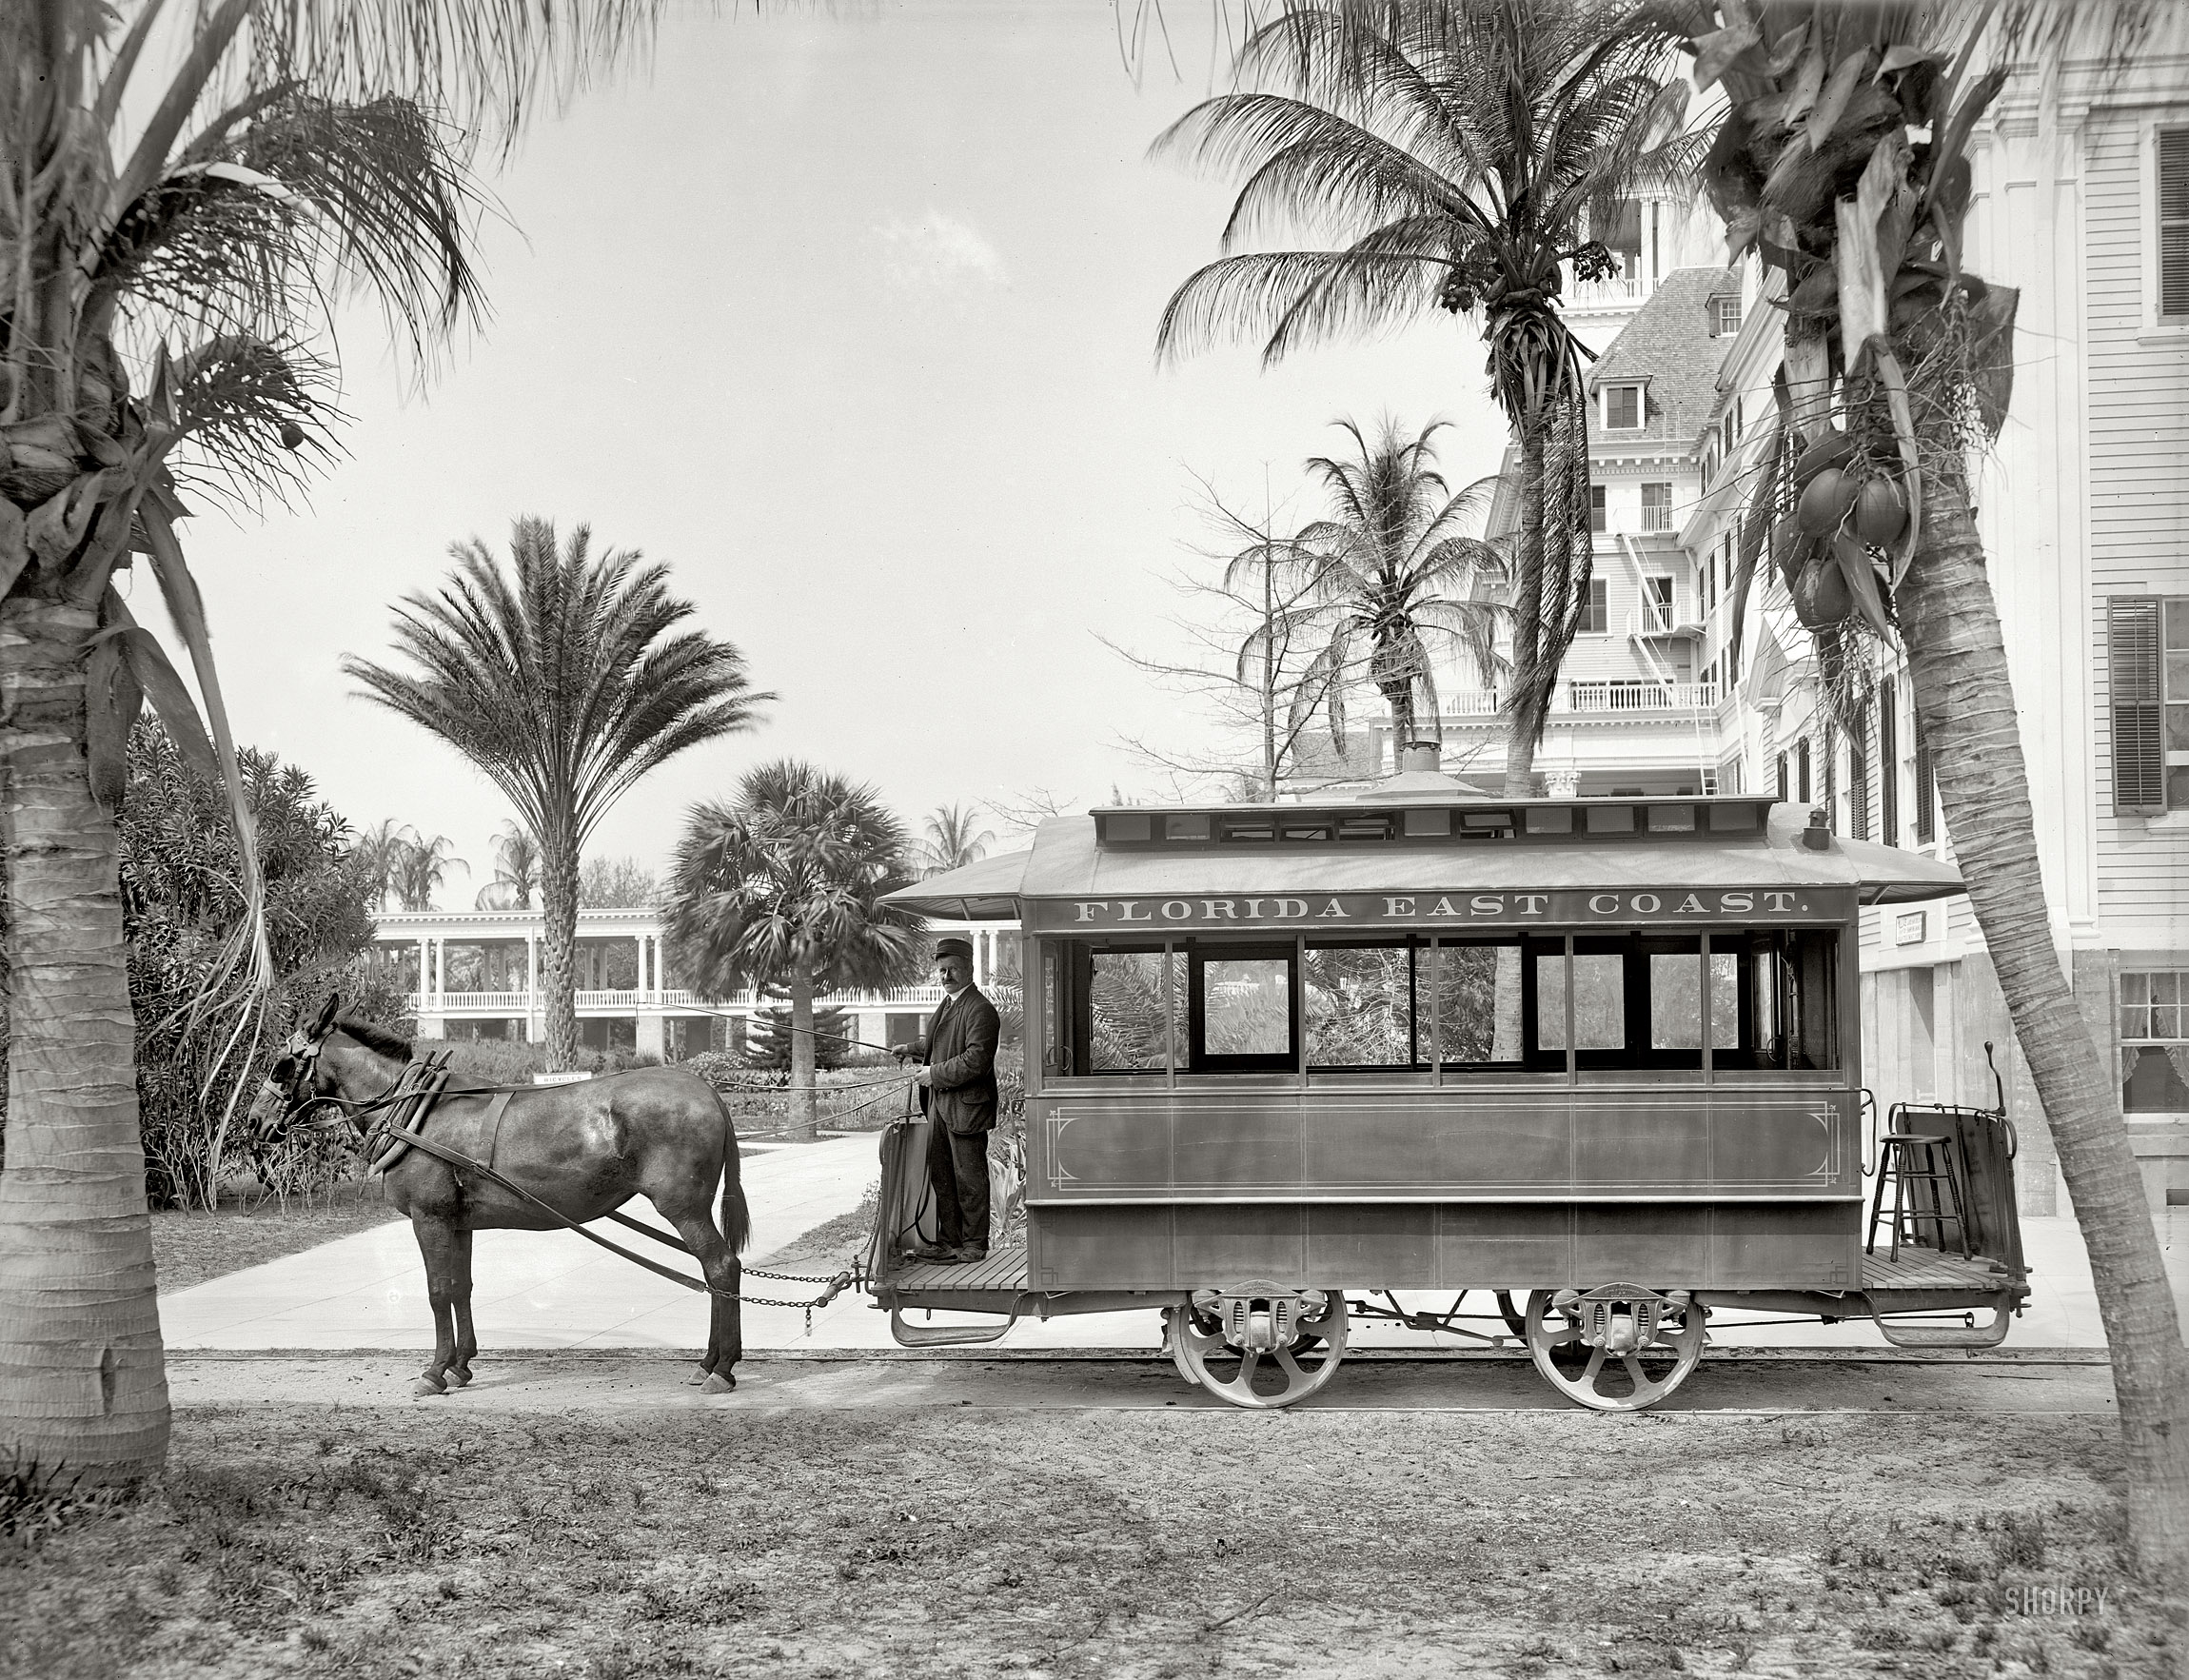 Florida circa 1905. "The Palm Beach 'trolley.' " Early development in the Sunshine State. 8x10 inch dry plate glass negative, Detroit Publishing Co. View full size.